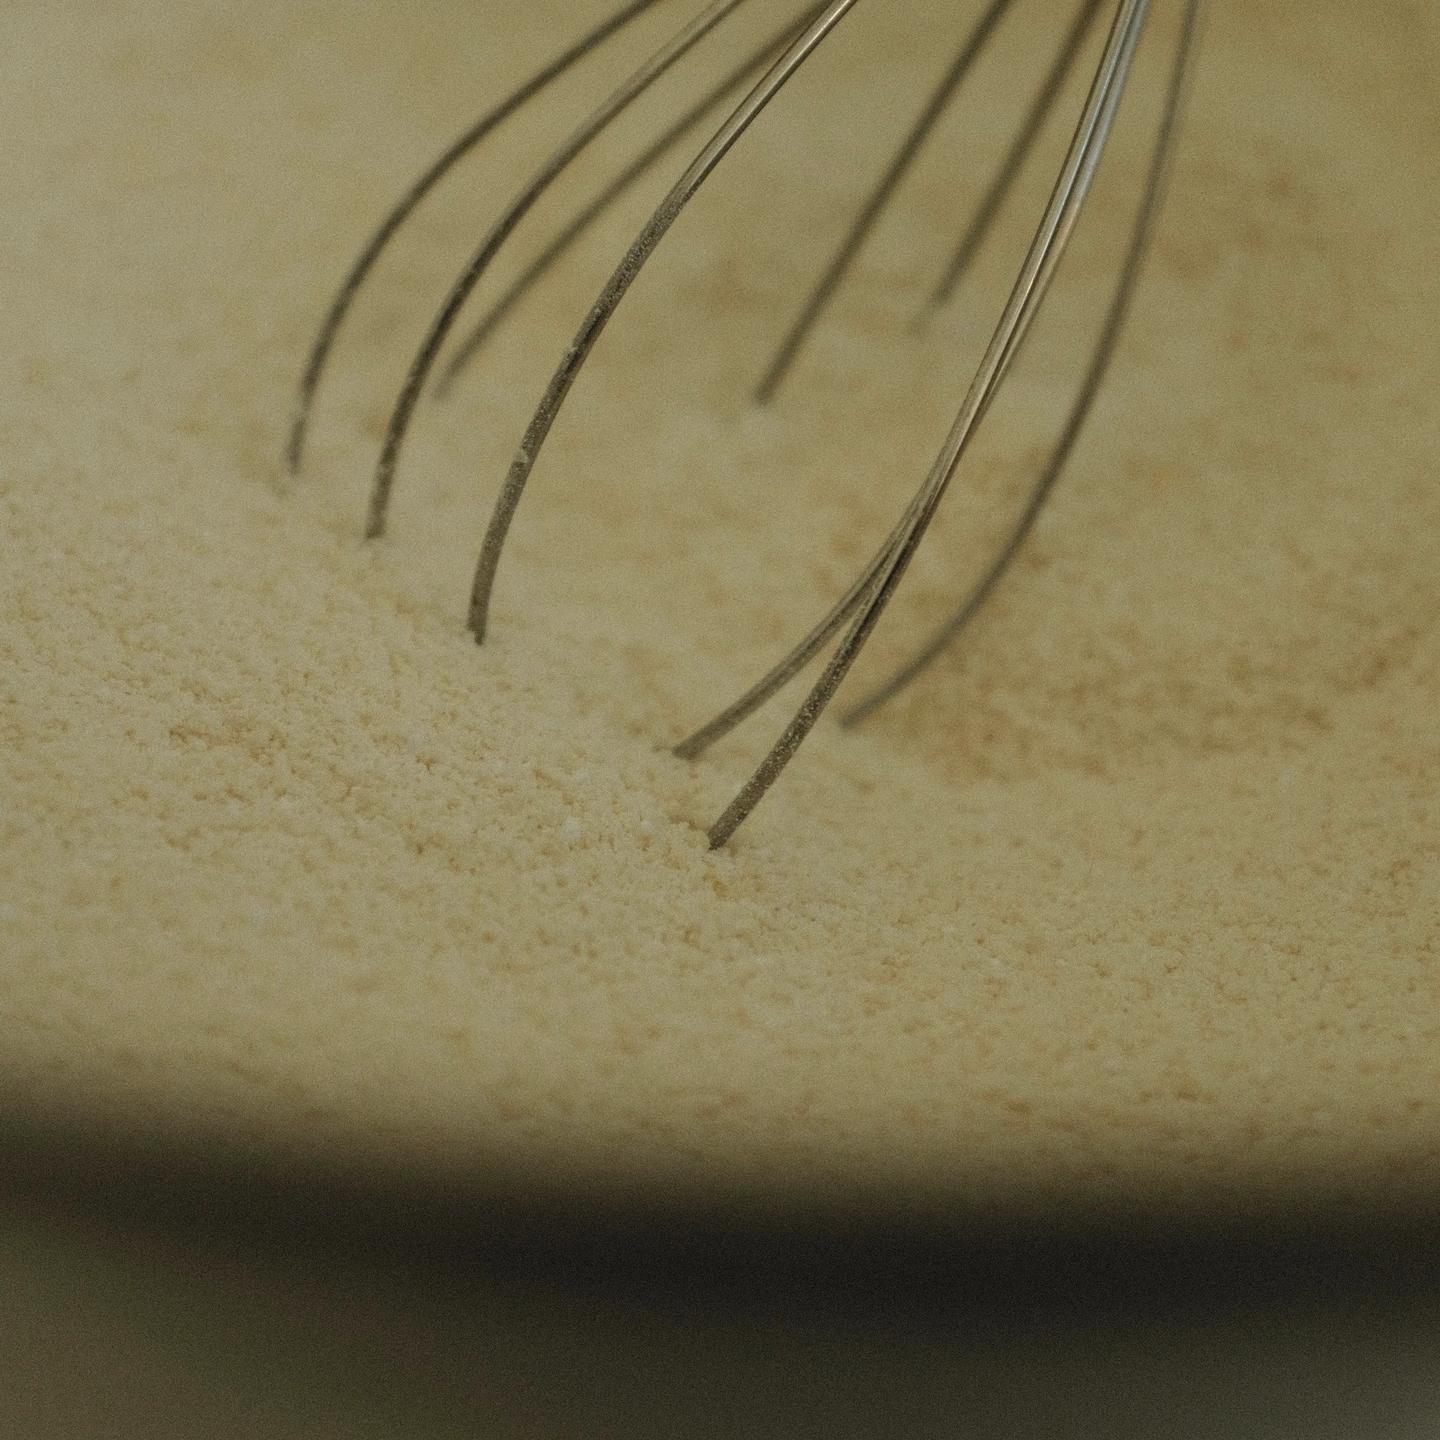 A whisker in flour